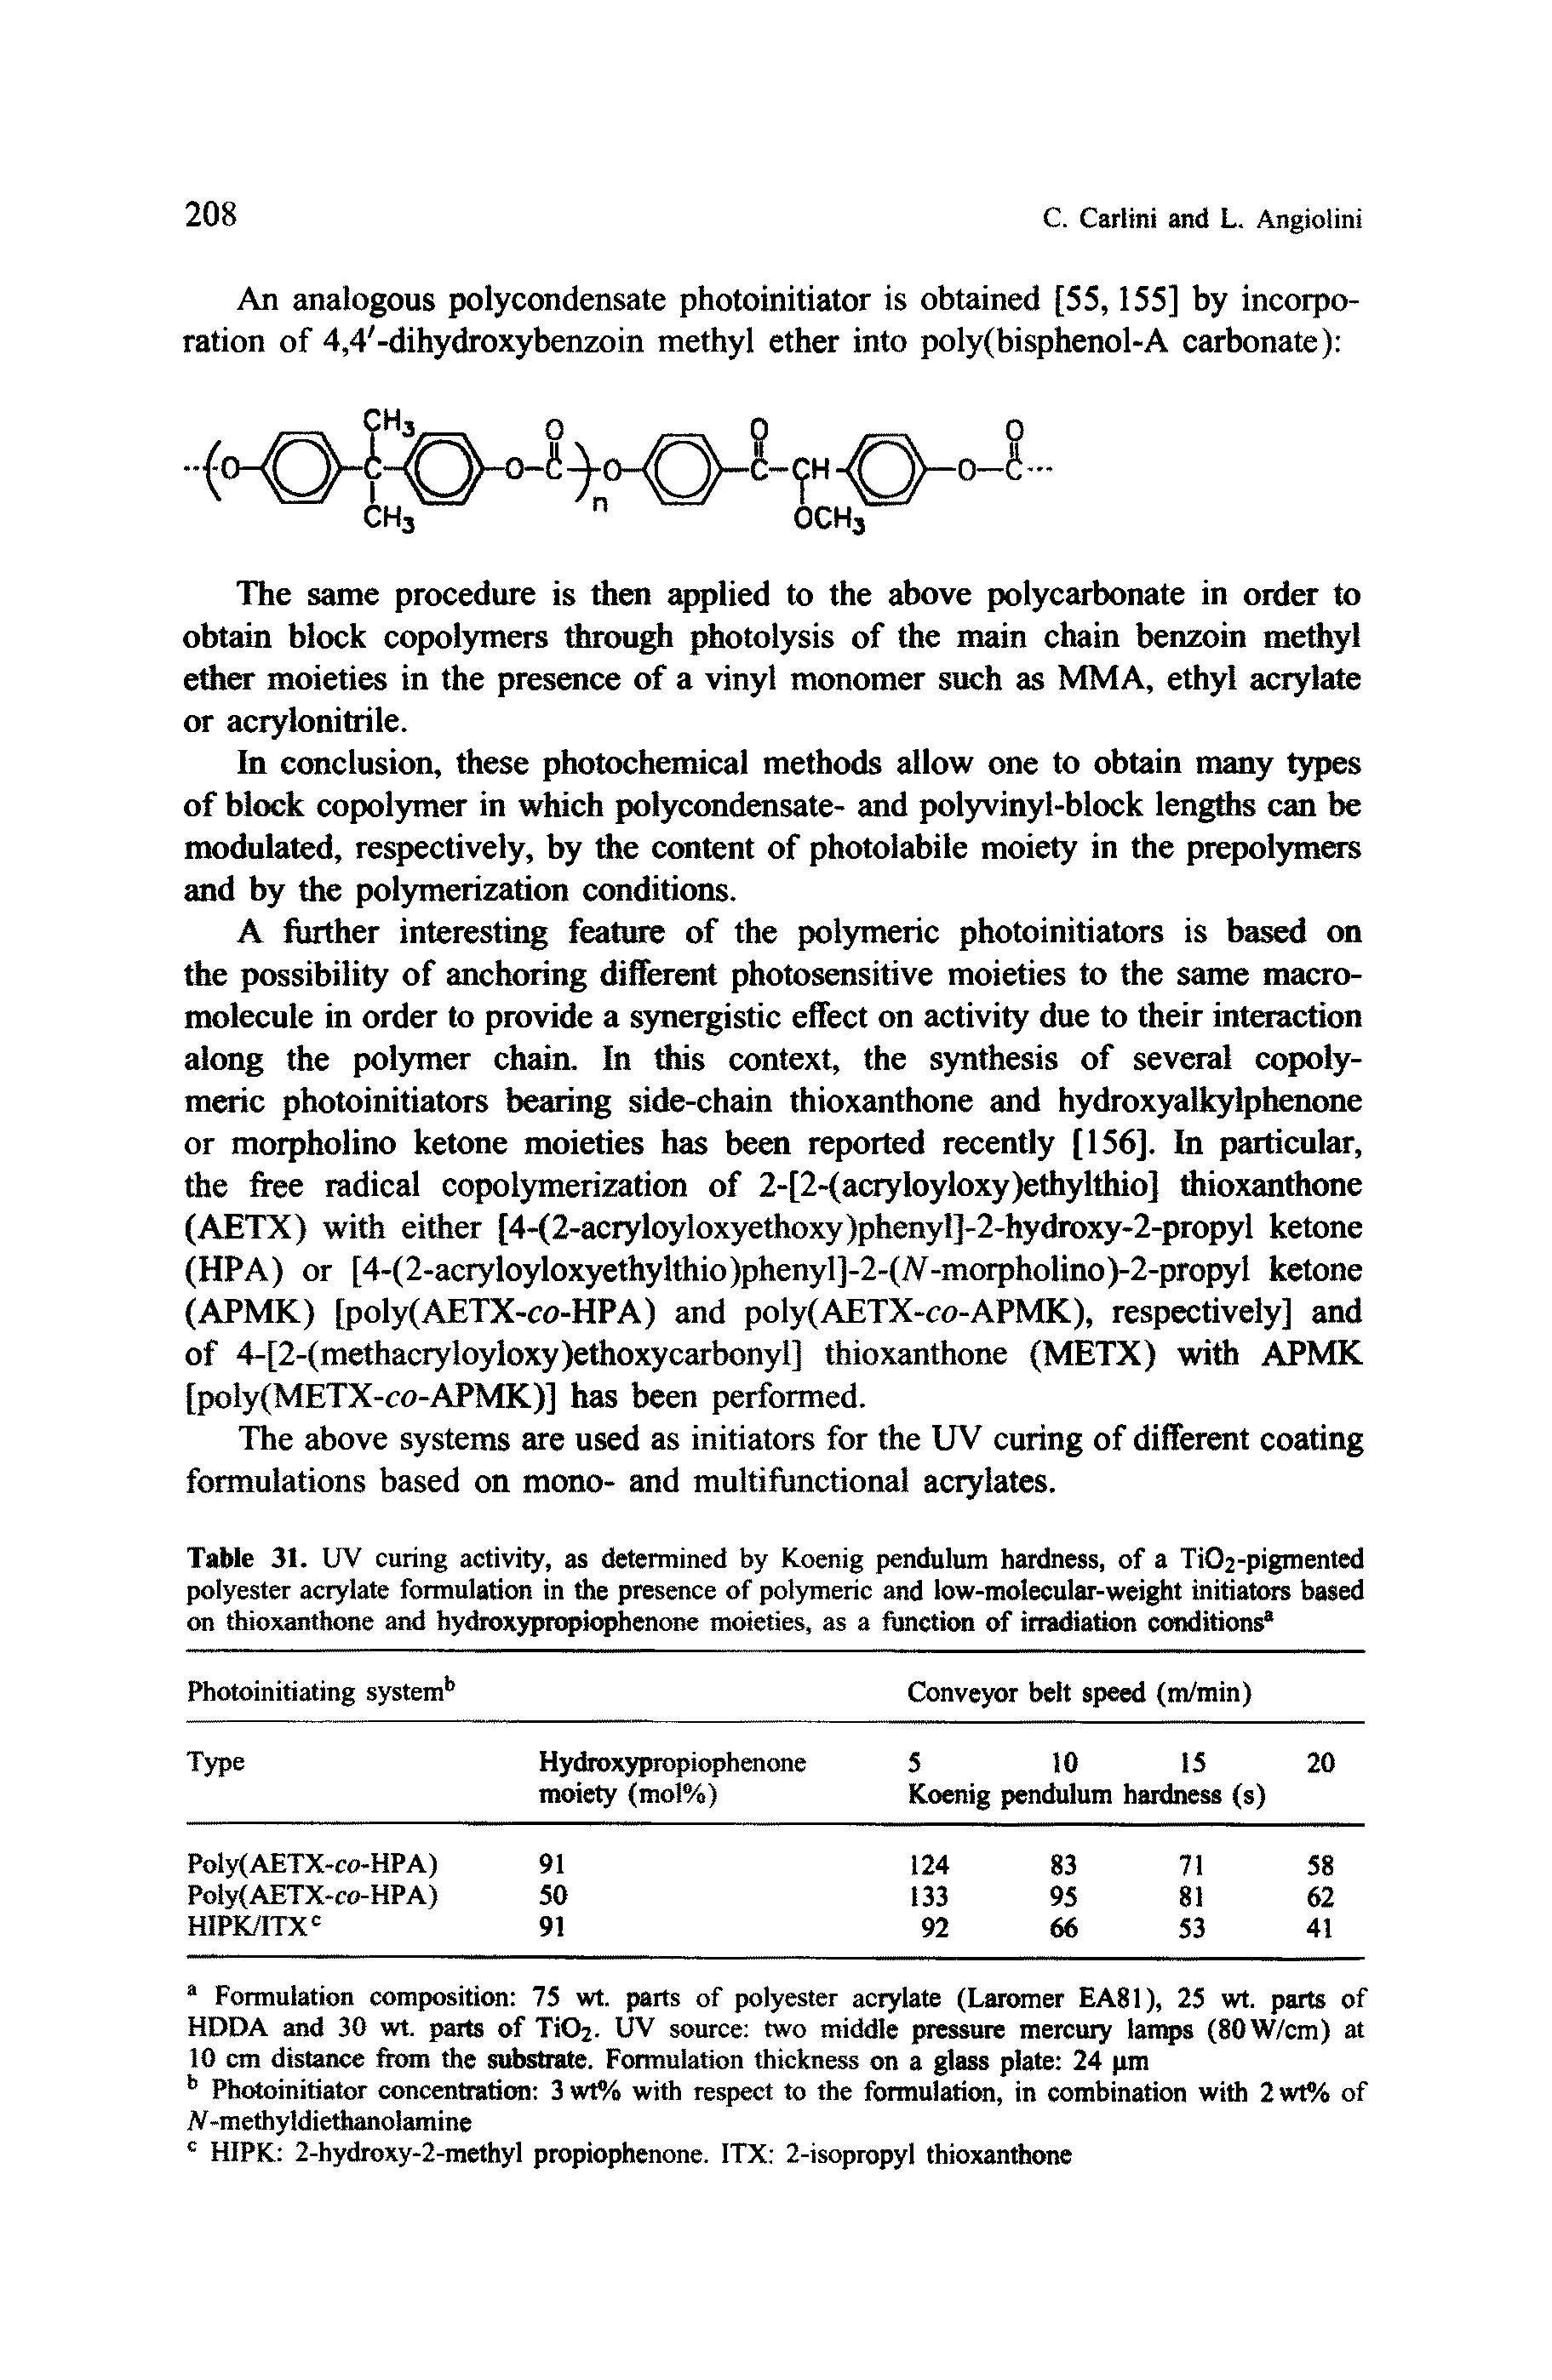 Table 31. UV curing activity, as determined by Koenig pendulum hardness, of a Ti02-pigmented polyester acrylate formulation in the presence of polymeric and low-molecular-weight initiators based on thioxanthone and hydroxypropiophenone moieties, as a taction of irradiation conditions ...